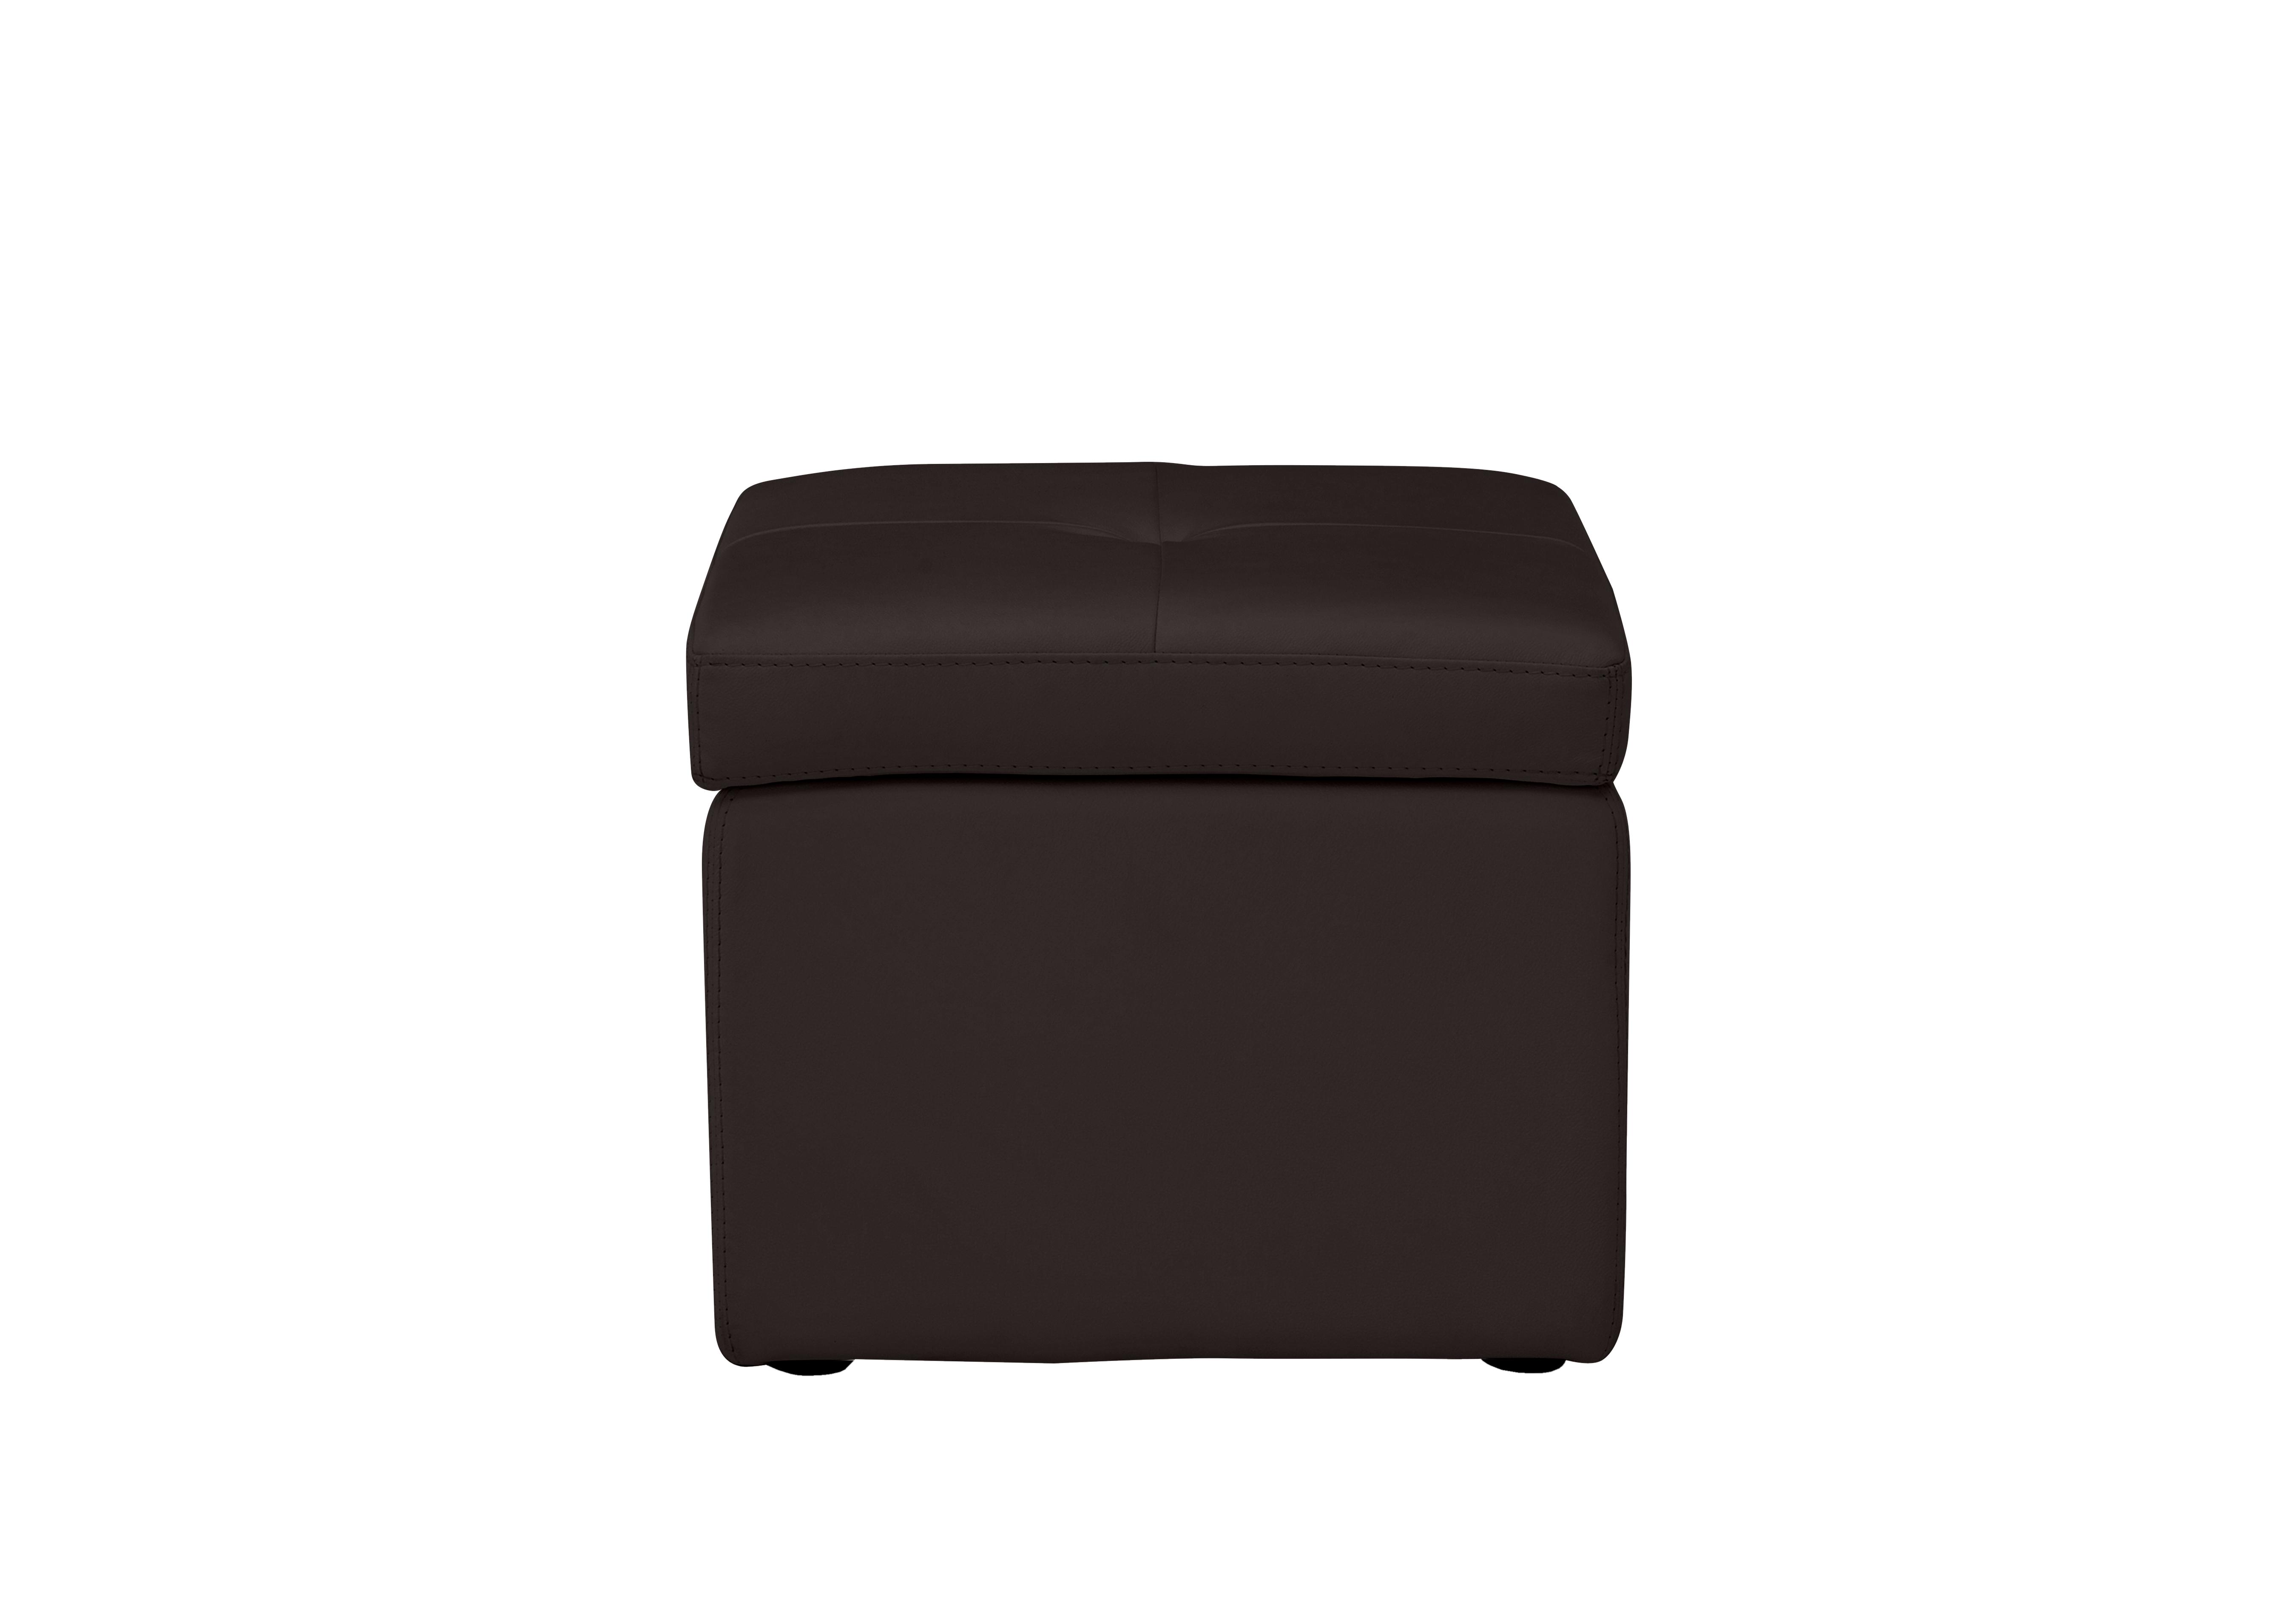 Easy Tray Leather Storage Footstool in Nc-037c Walnut on Furniture Village